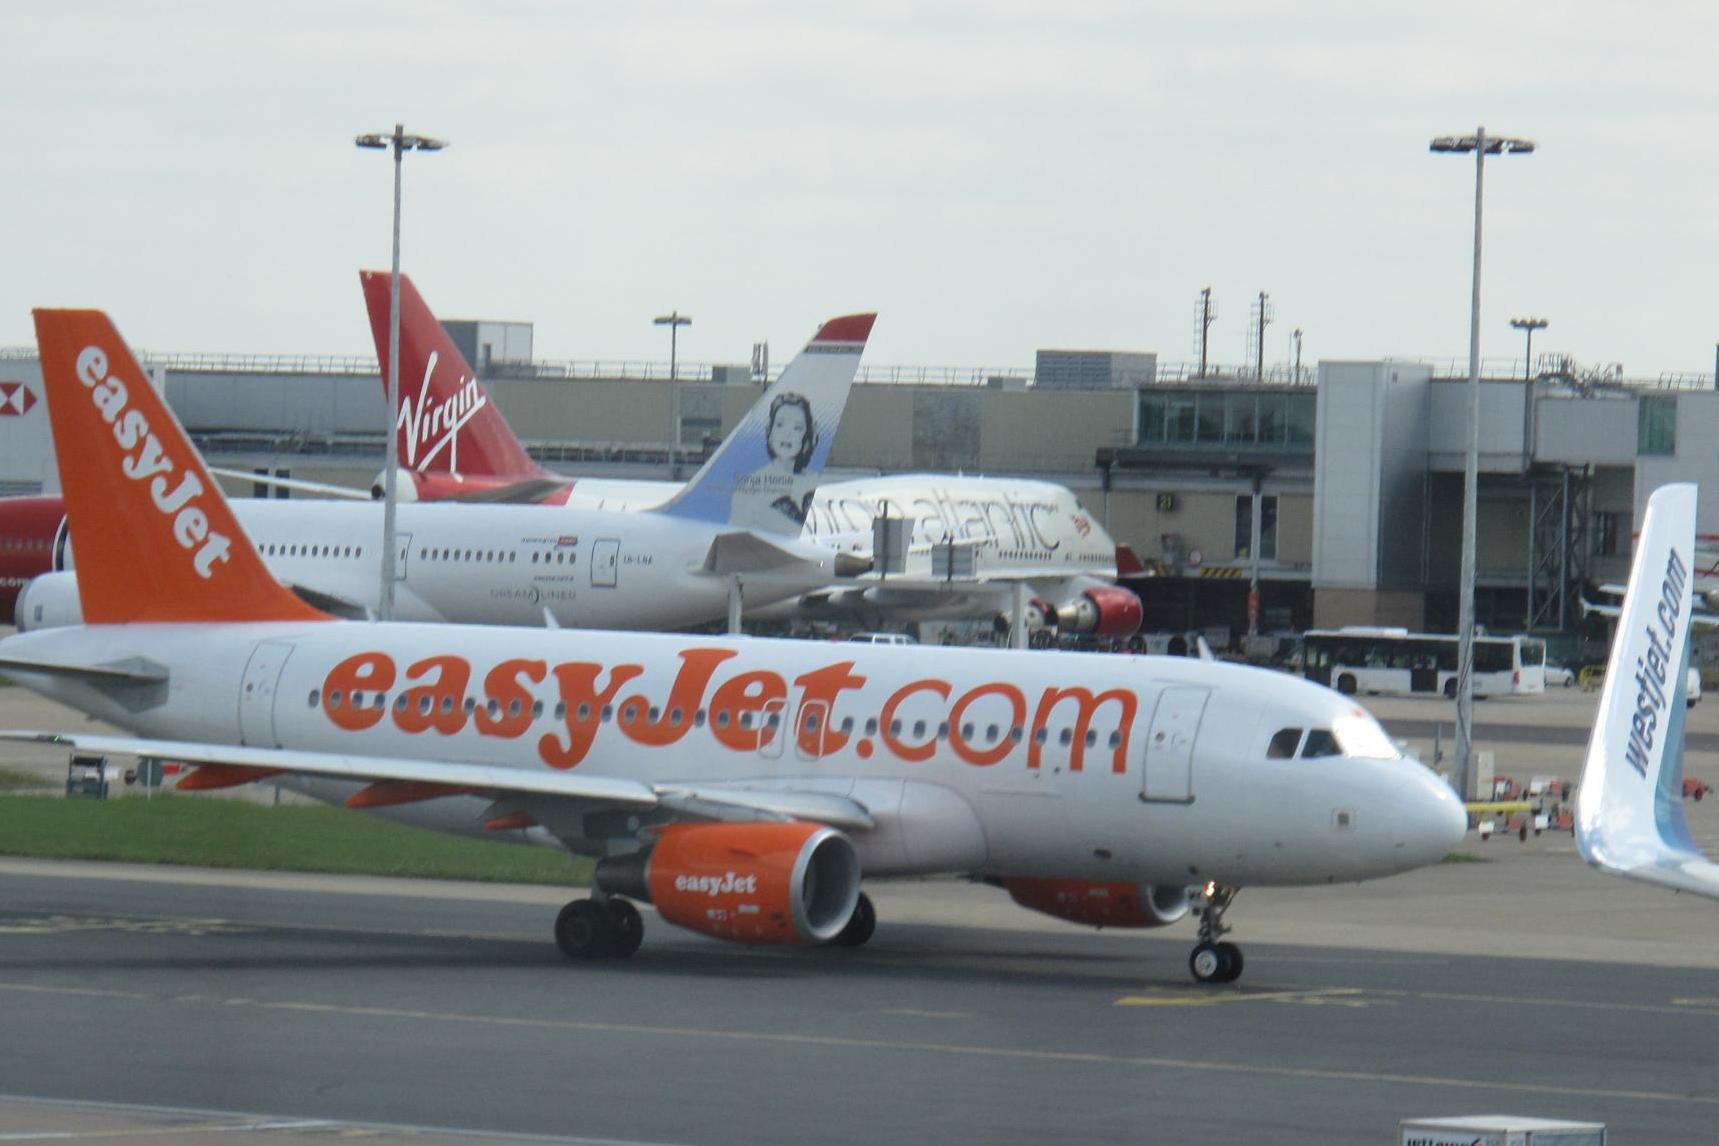 Earlier this month easyJet said it would set up a new airline headquartered in Vienna to protect its flying rights after Brexit